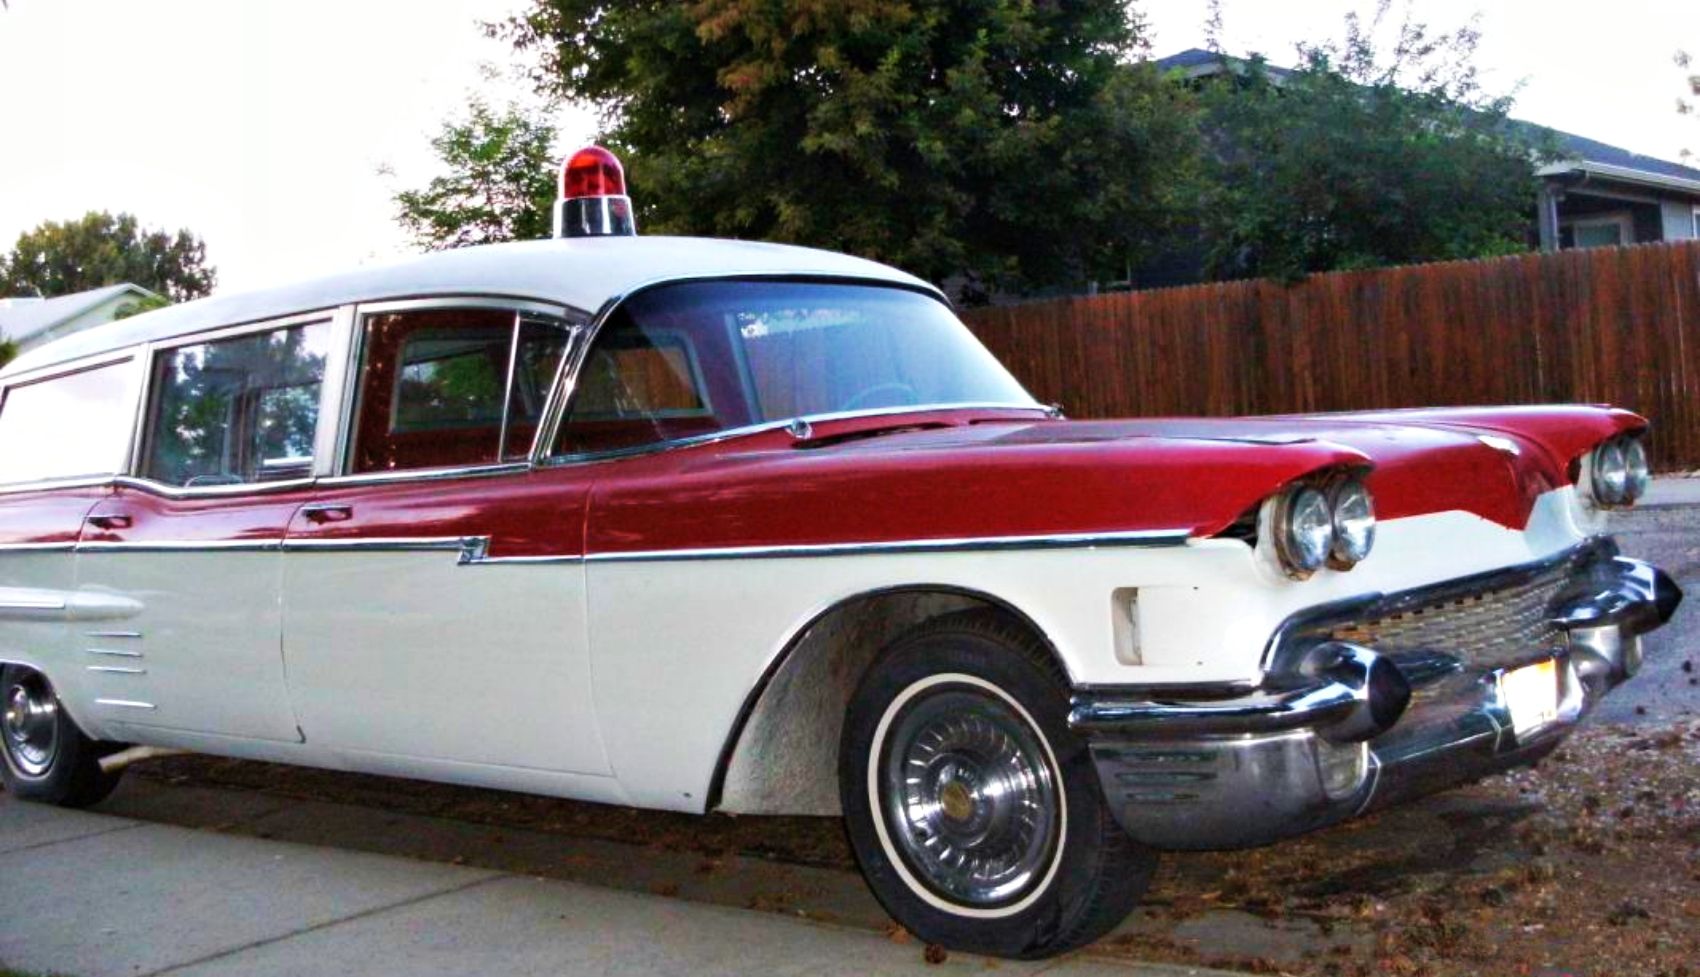 You Want This - 1959 Cadillac Miller-Meteor Sentinel Ambulance 1